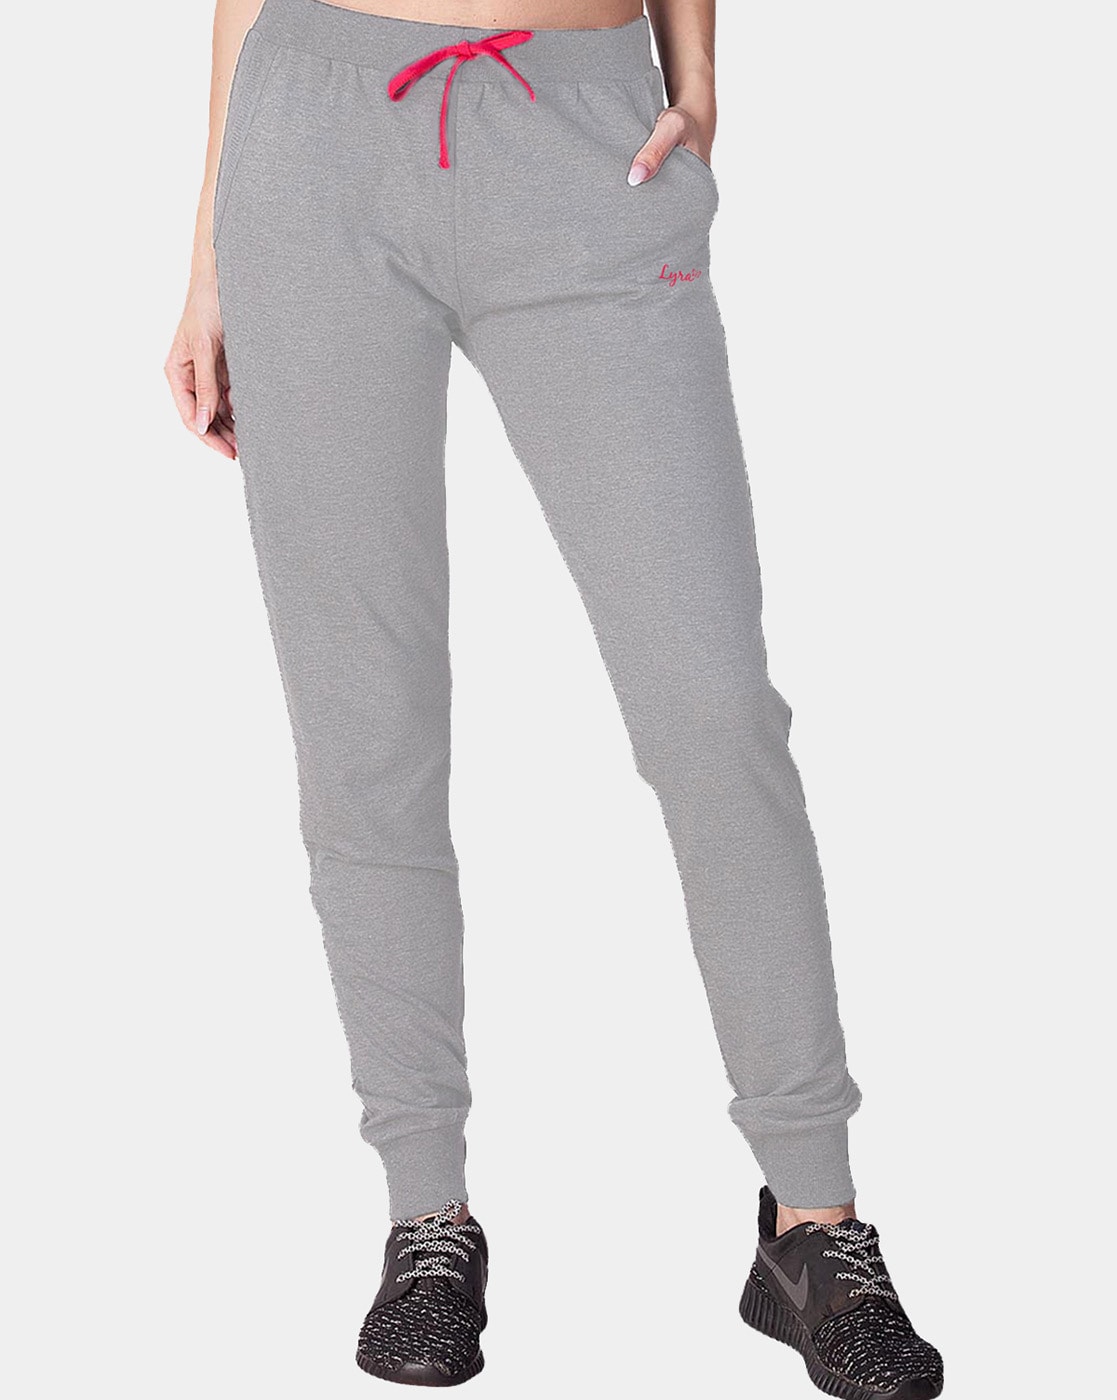 Buy Lux Lyra Grey Track Pants - Track Pants for Women 2037783 | Myntra